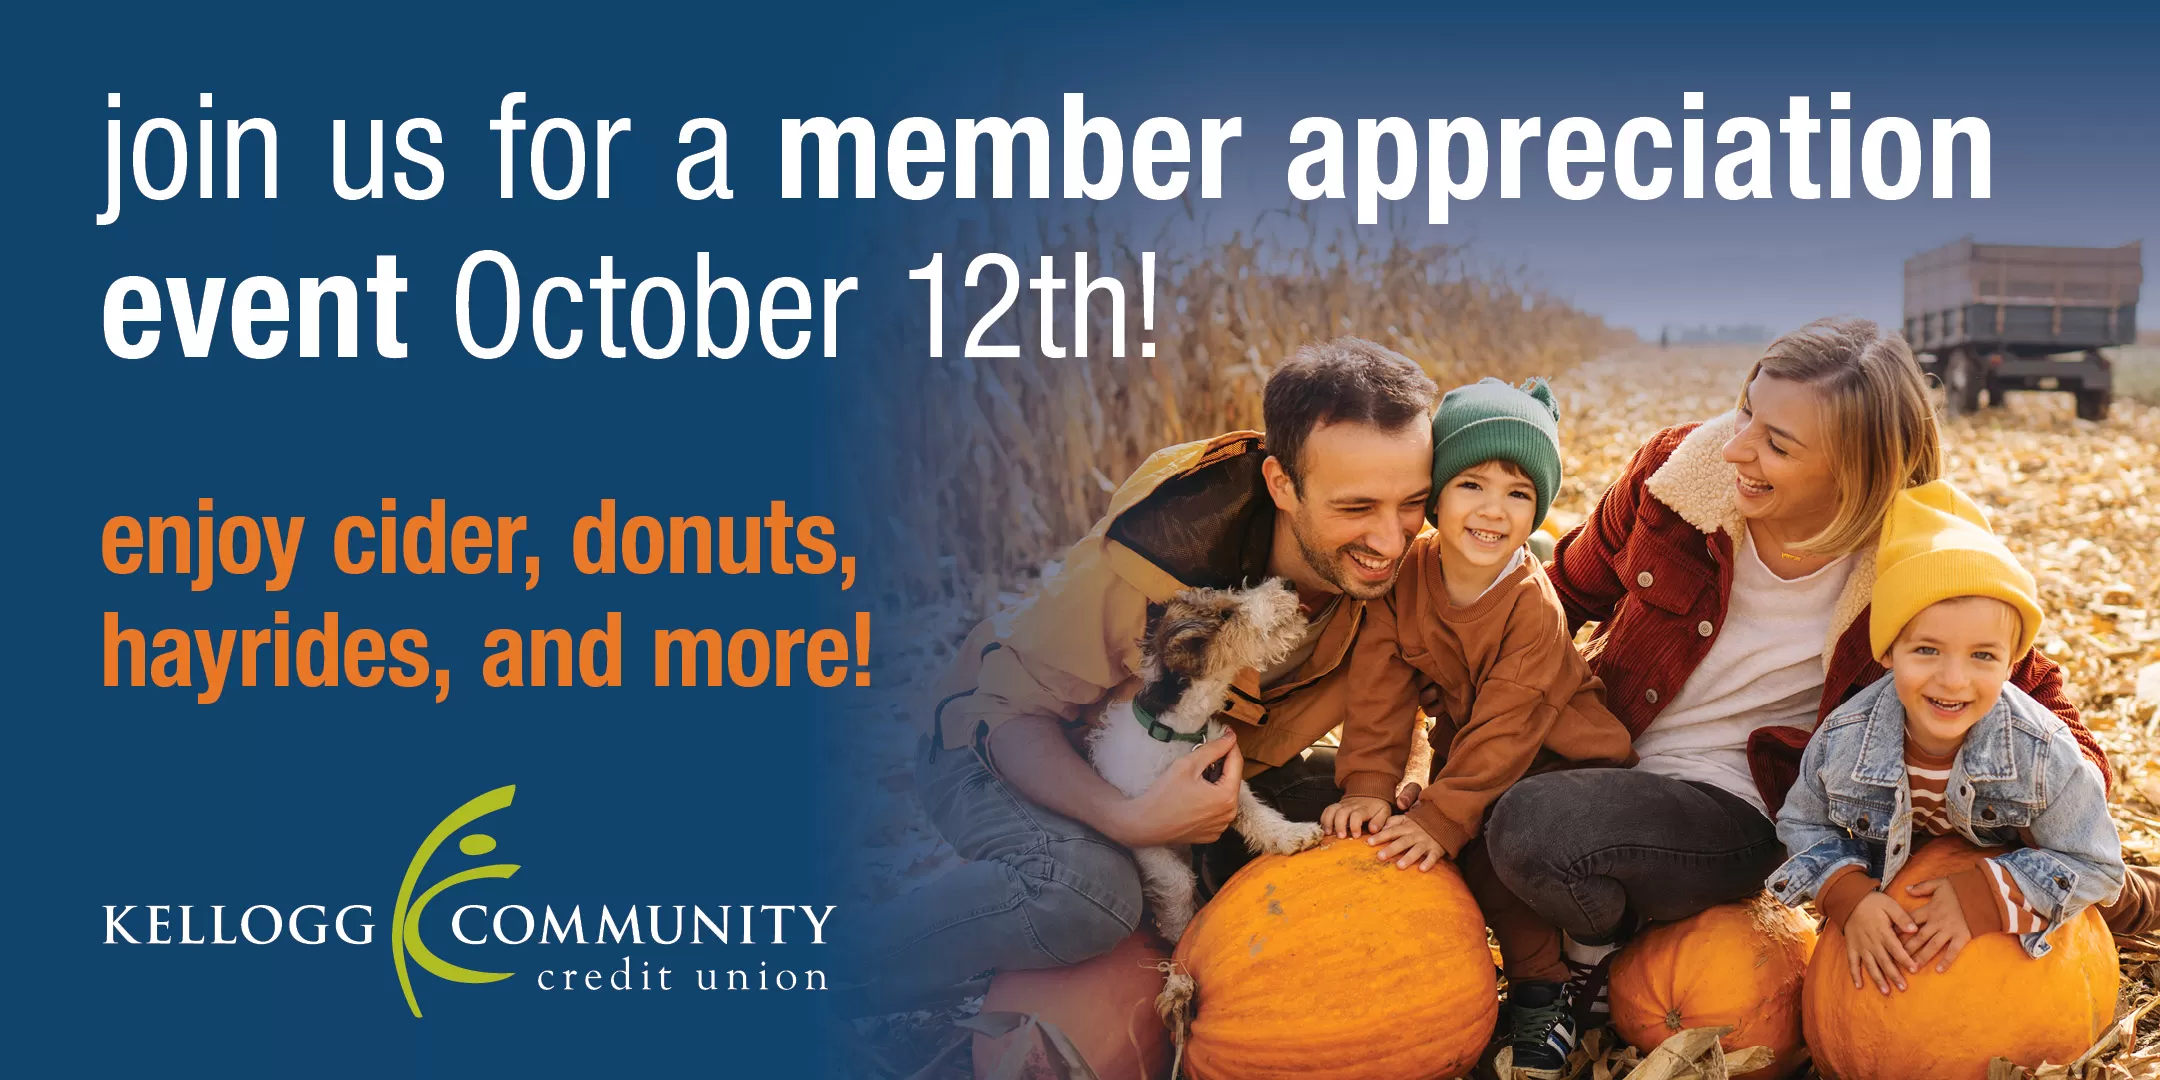 Join us for a member appreciation event